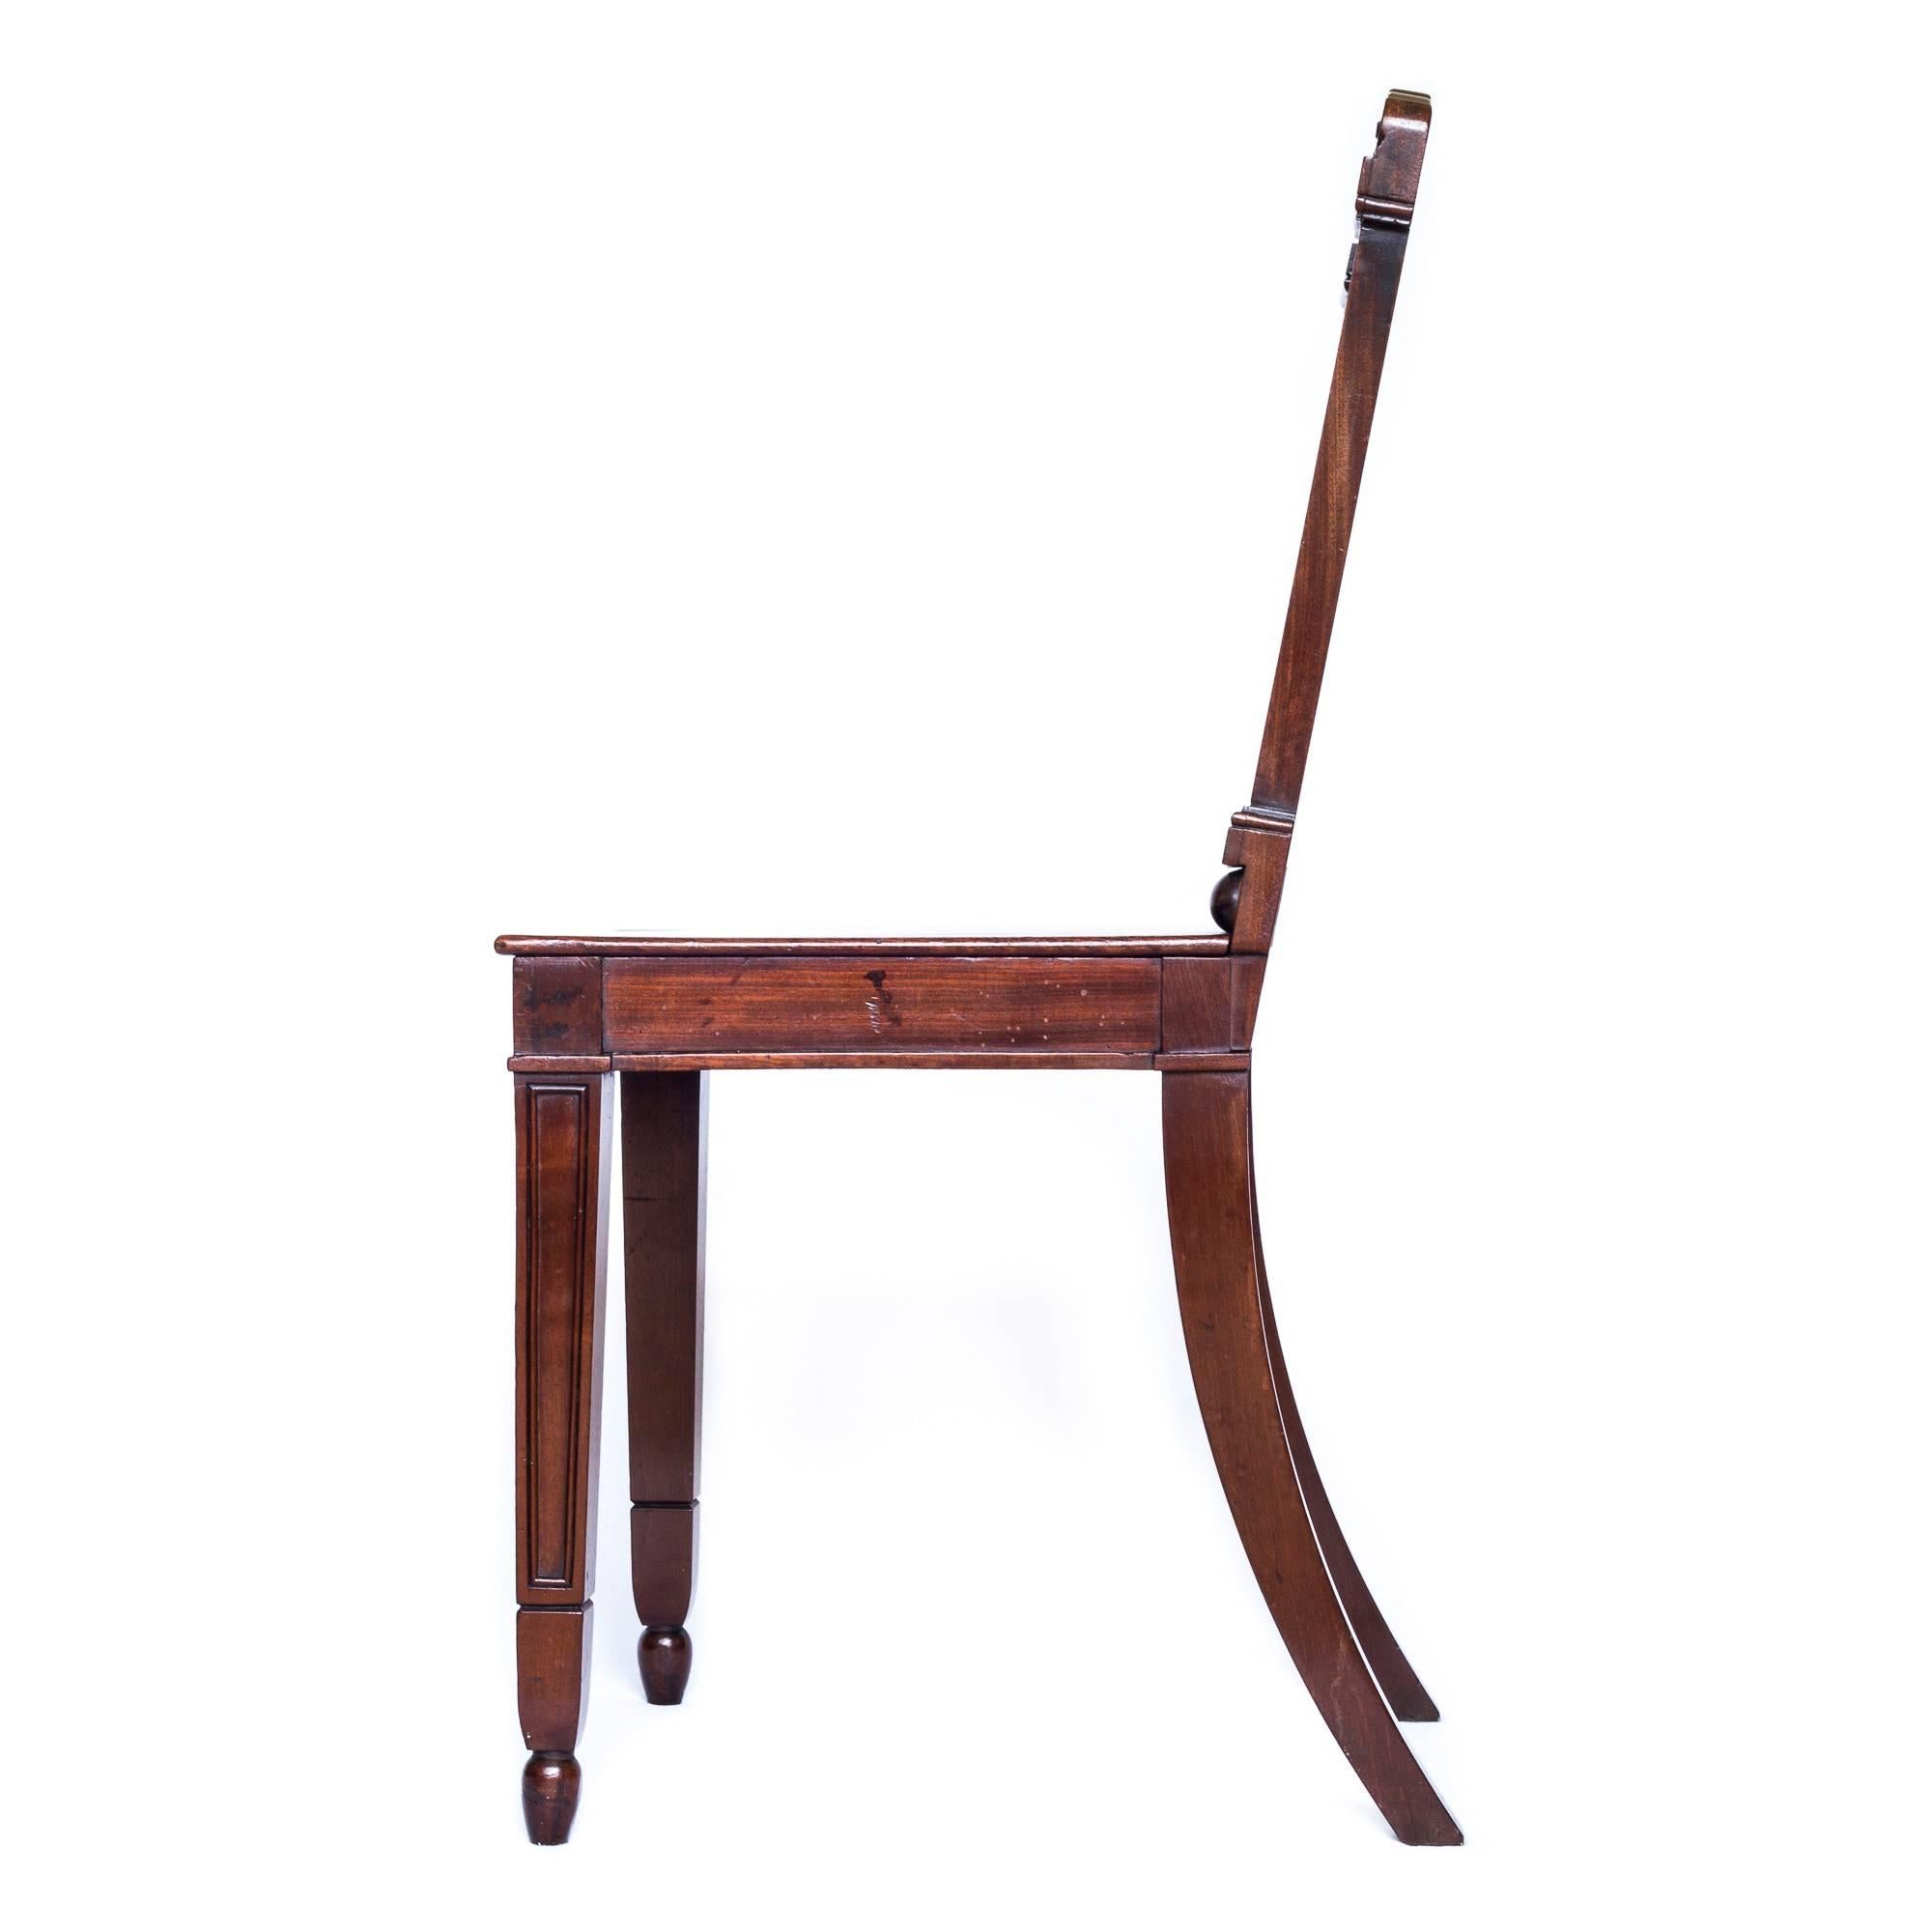 Carved Fine English George III Regency Mahogany Hall Chair, Attributed to Gillows